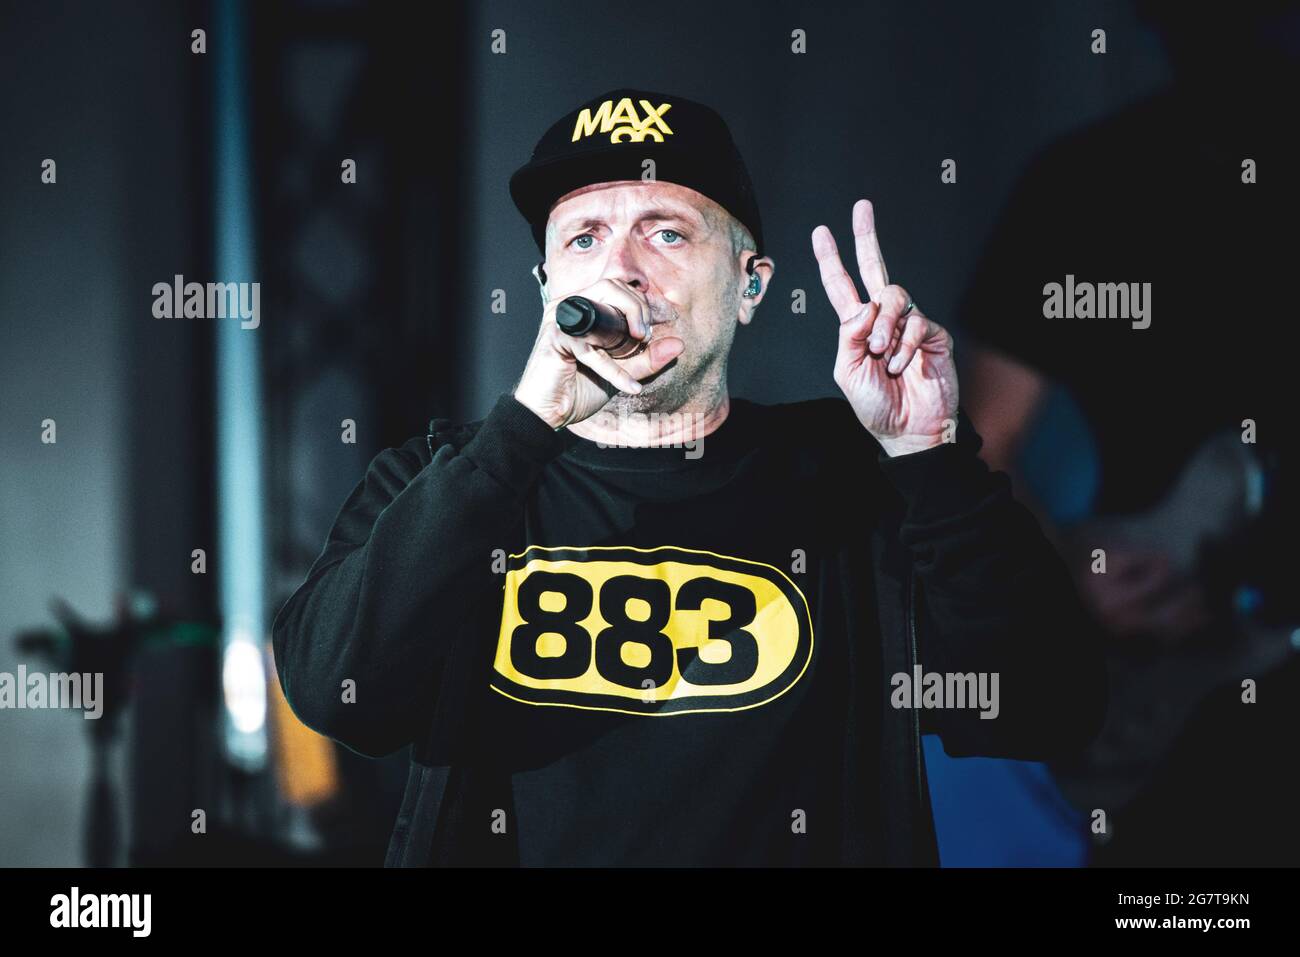 Stupinigi, Italy. 15th July, 2021. The Italian pop singer Max Pezzali  performing live on stage at the Stupinigi hunting mansion for his “Max 90”  Italian tour. (Photo by Alessandro Bosio/Pacific Press/Sipa USA)